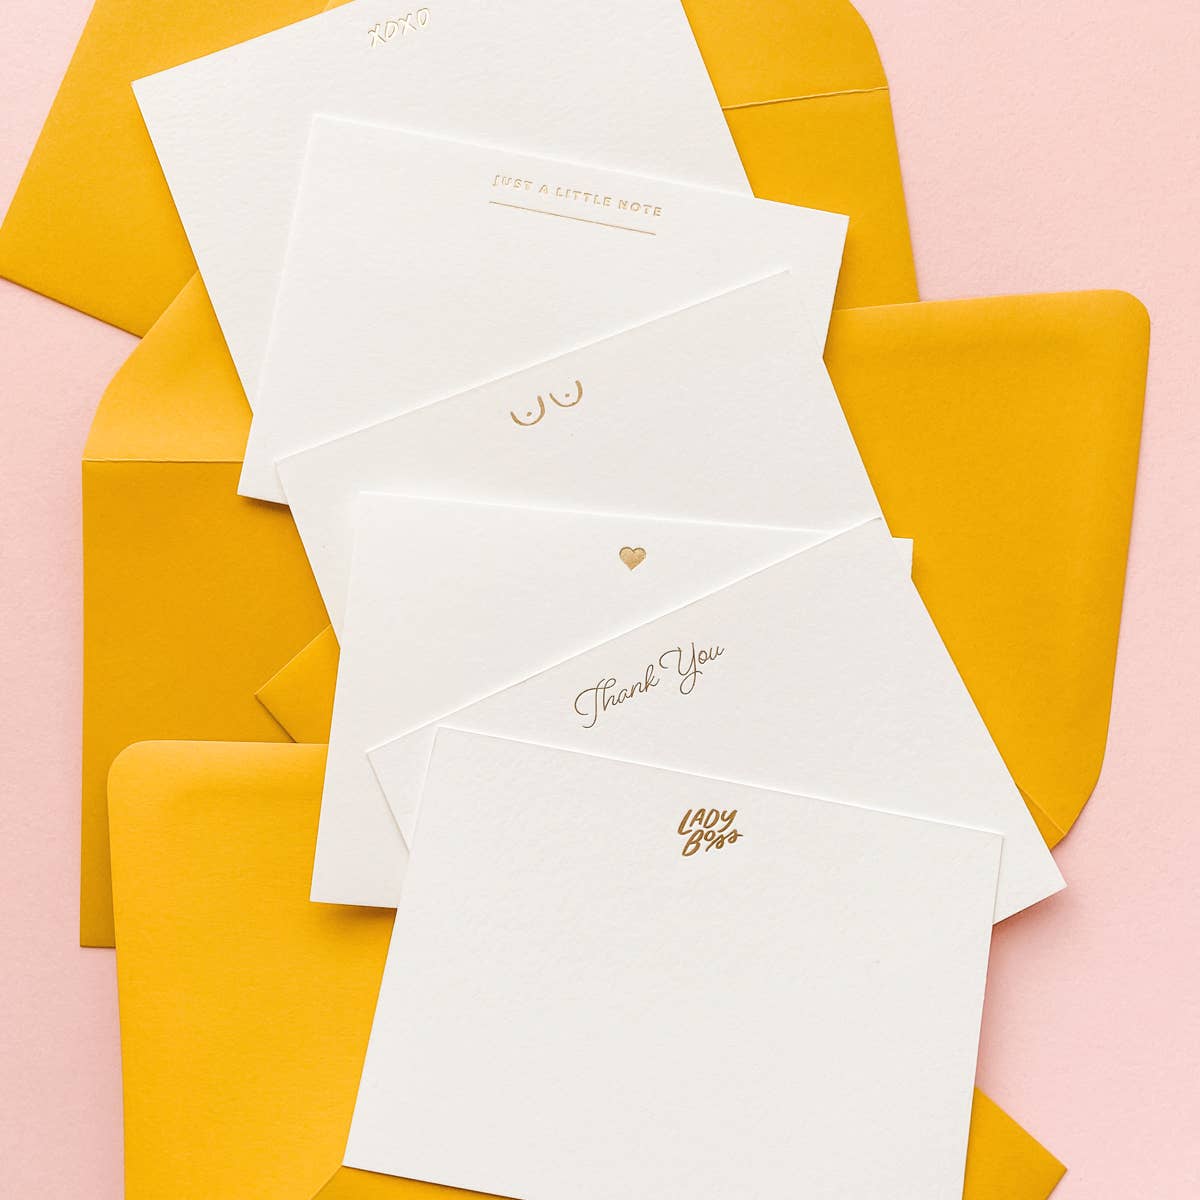 assorted white flat notes with small gold foil detailing on each against mustard yellow envelopes